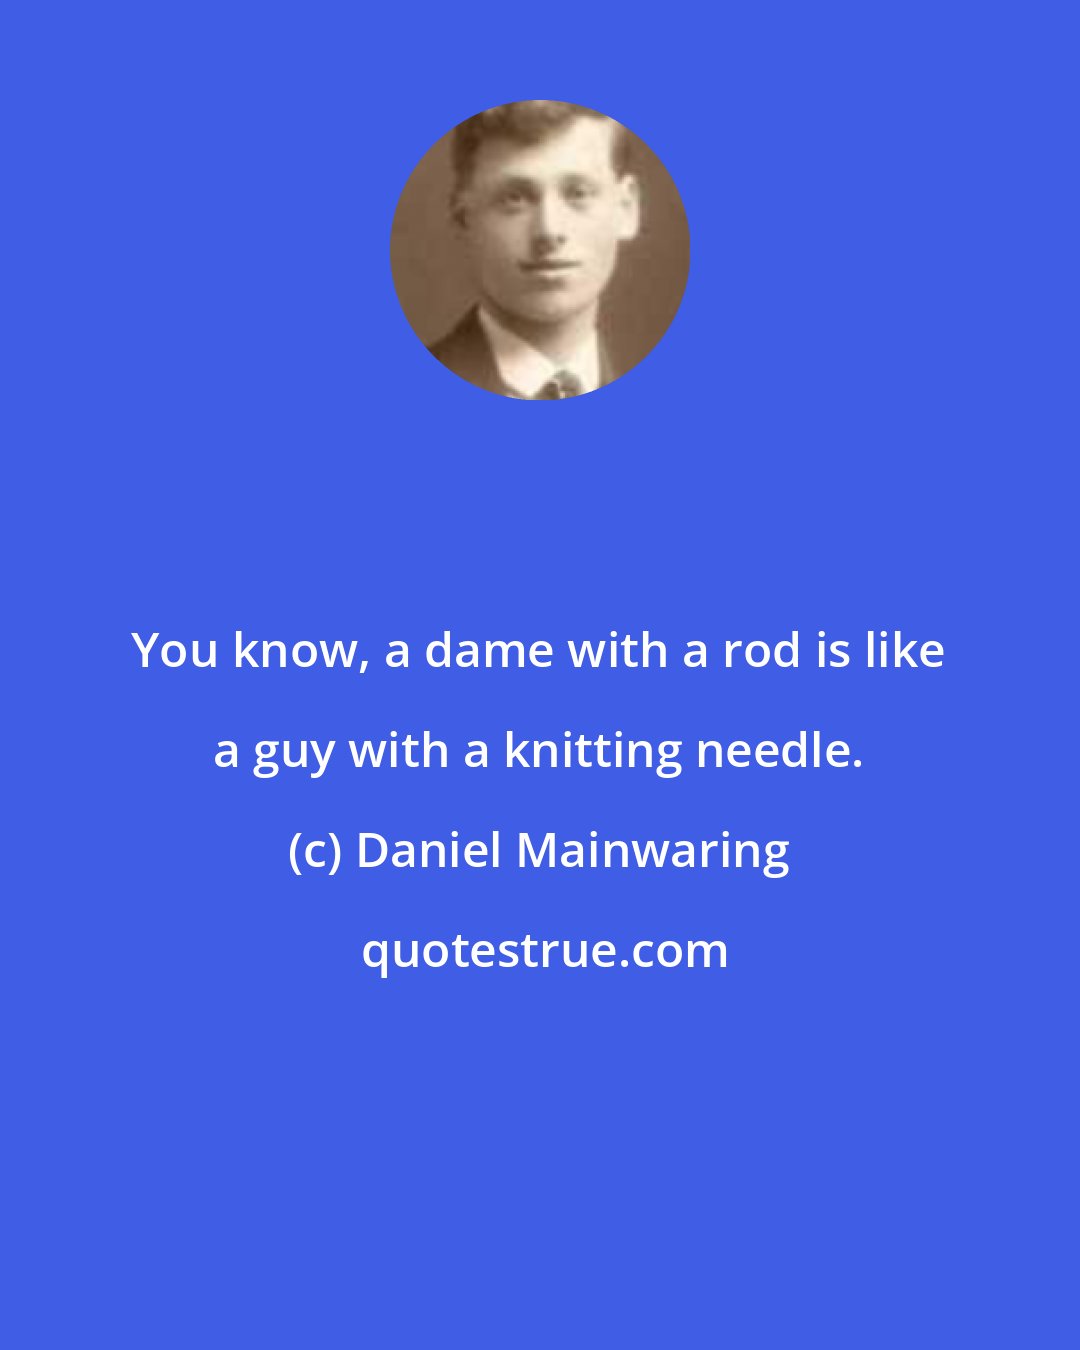 Daniel Mainwaring: You know, a dame with a rod is like a guy with a knitting needle.